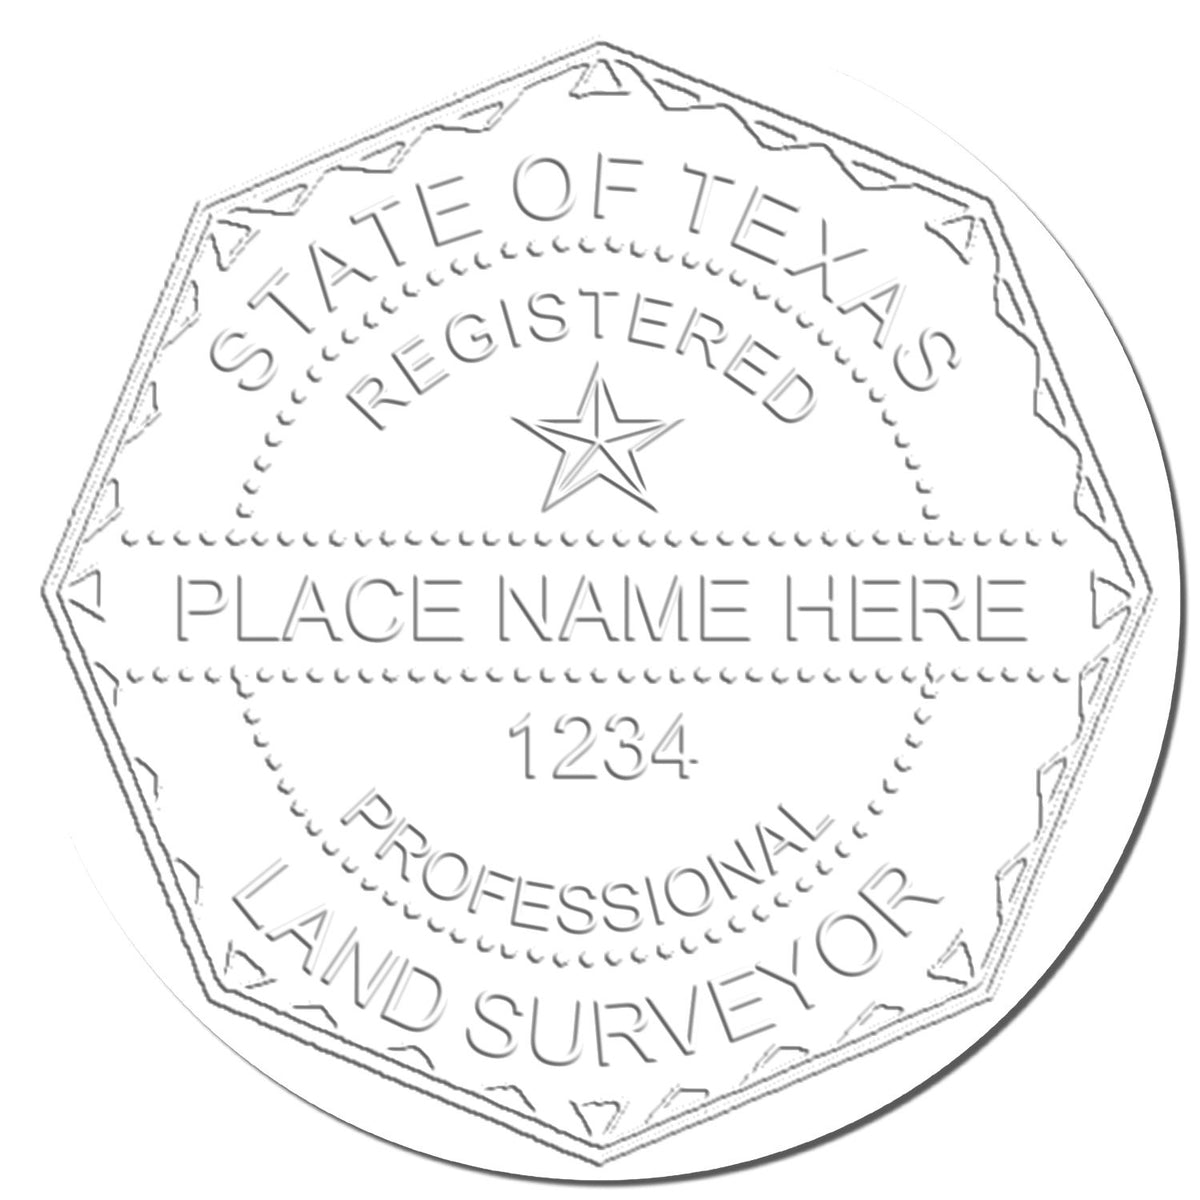 This paper is stamped with a sample imprint of the Hybrid Texas Land Surveyor Seal, signifying its quality and reliability.